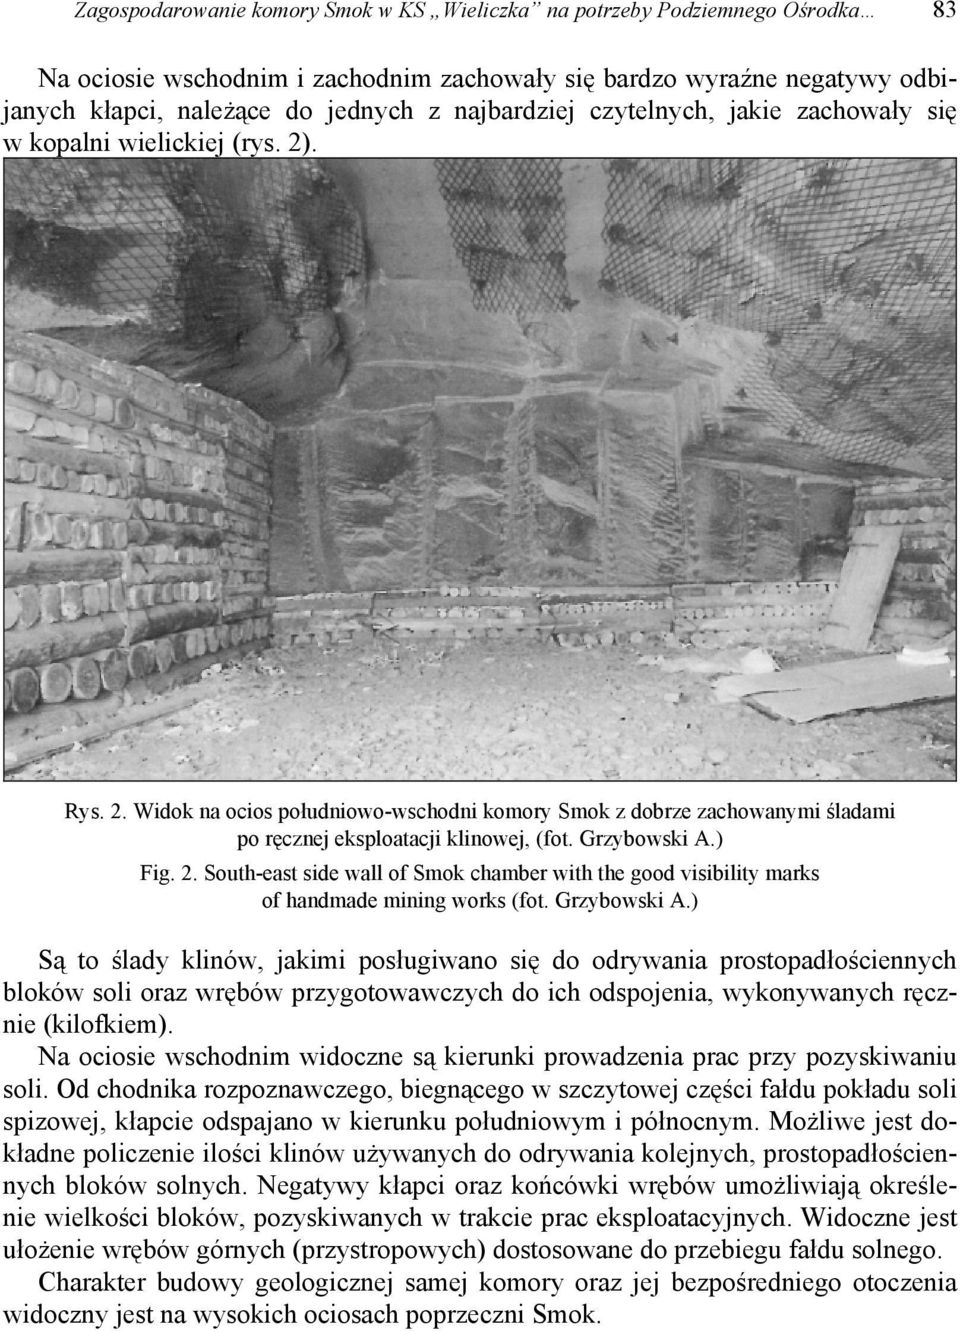 Grzybowski A.) Fig. 2. South-east side wall of Smok chamber with the good visibility marks of handmade mining works (fot. Grzybowski A.